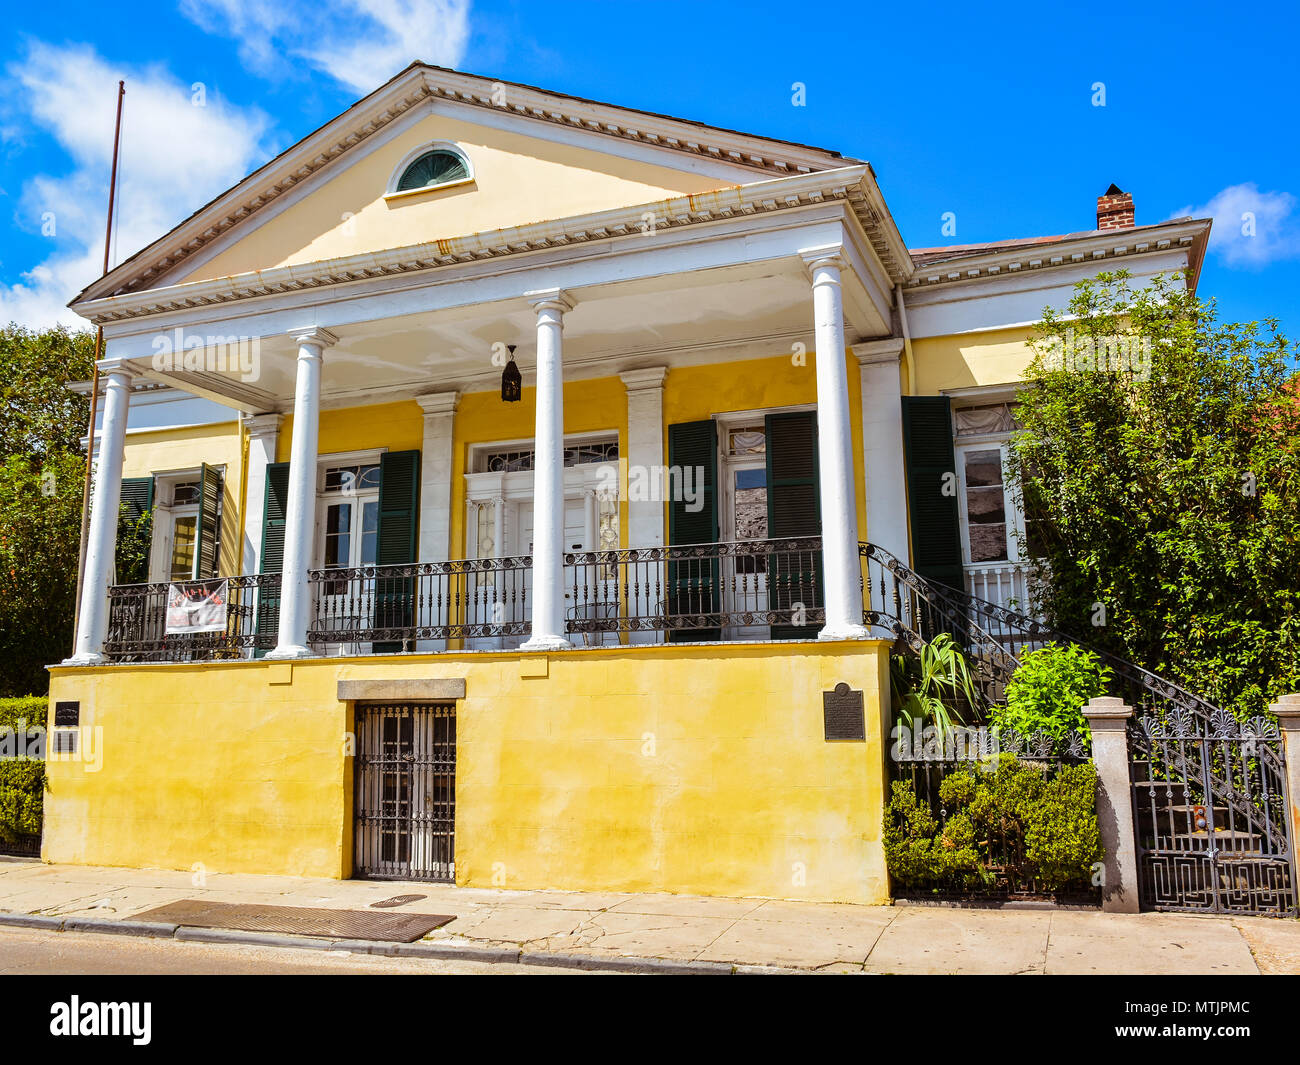 New Orleans, LA - Sep. 24, 2017: Historic Le-Carpentier House. Built in 1826, it was the one-time dwelling of General P.G.T. Beauregard of the CSA. Stock Photo